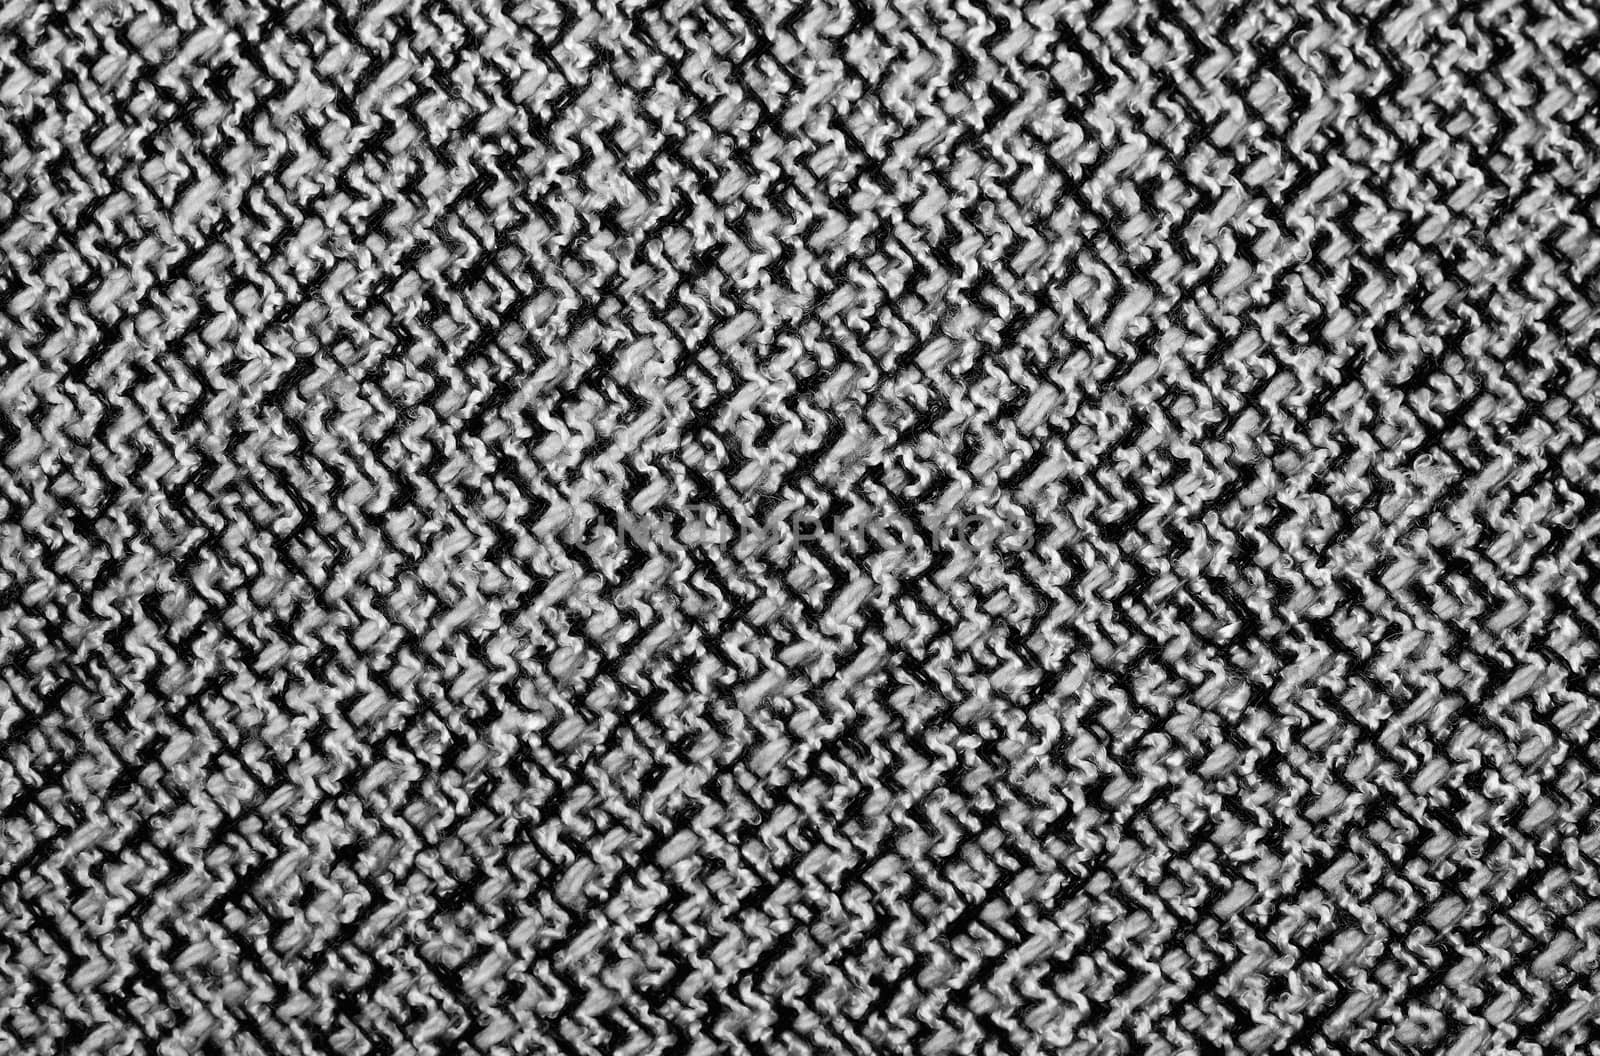  Grey tweed -like texture, gray wool pattern, textured salt and pepper style black and white melange upholstery. tweed fabric textile, textured mélange upholstery fabric background space for background and texture, fashion